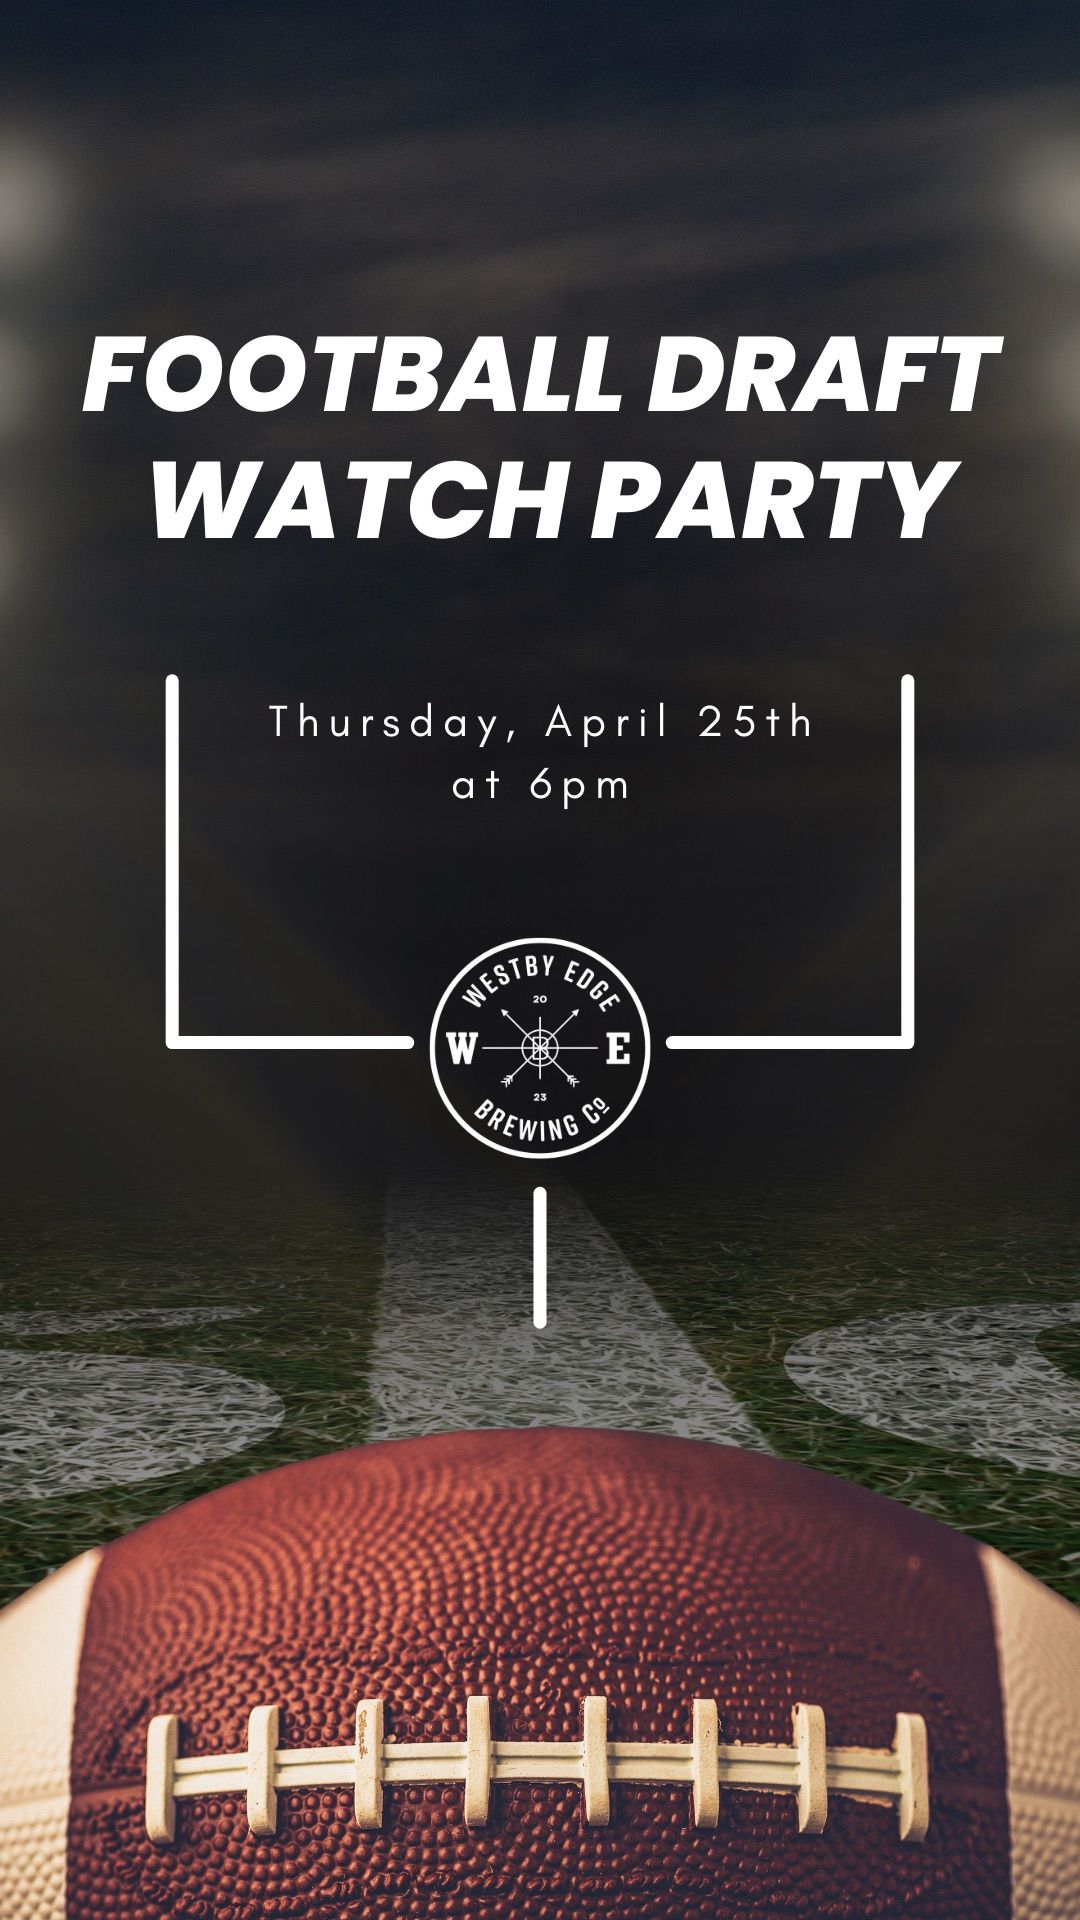 Football Draft Watch Party ?